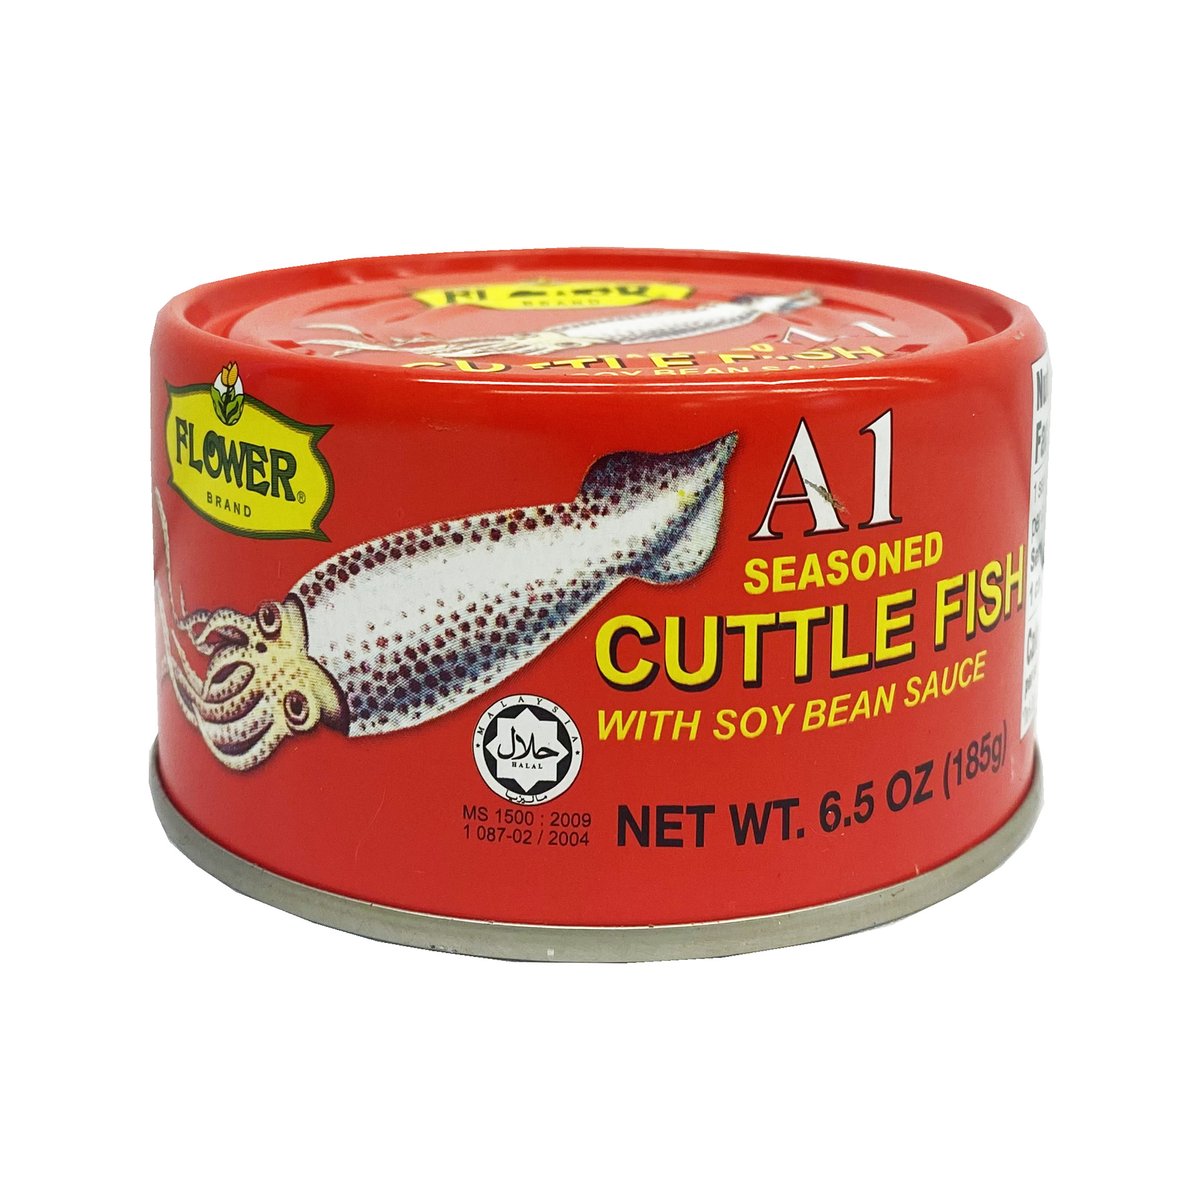 Flower Brand A1 Seasoned Cuttlefish with Soy Bean Sauce